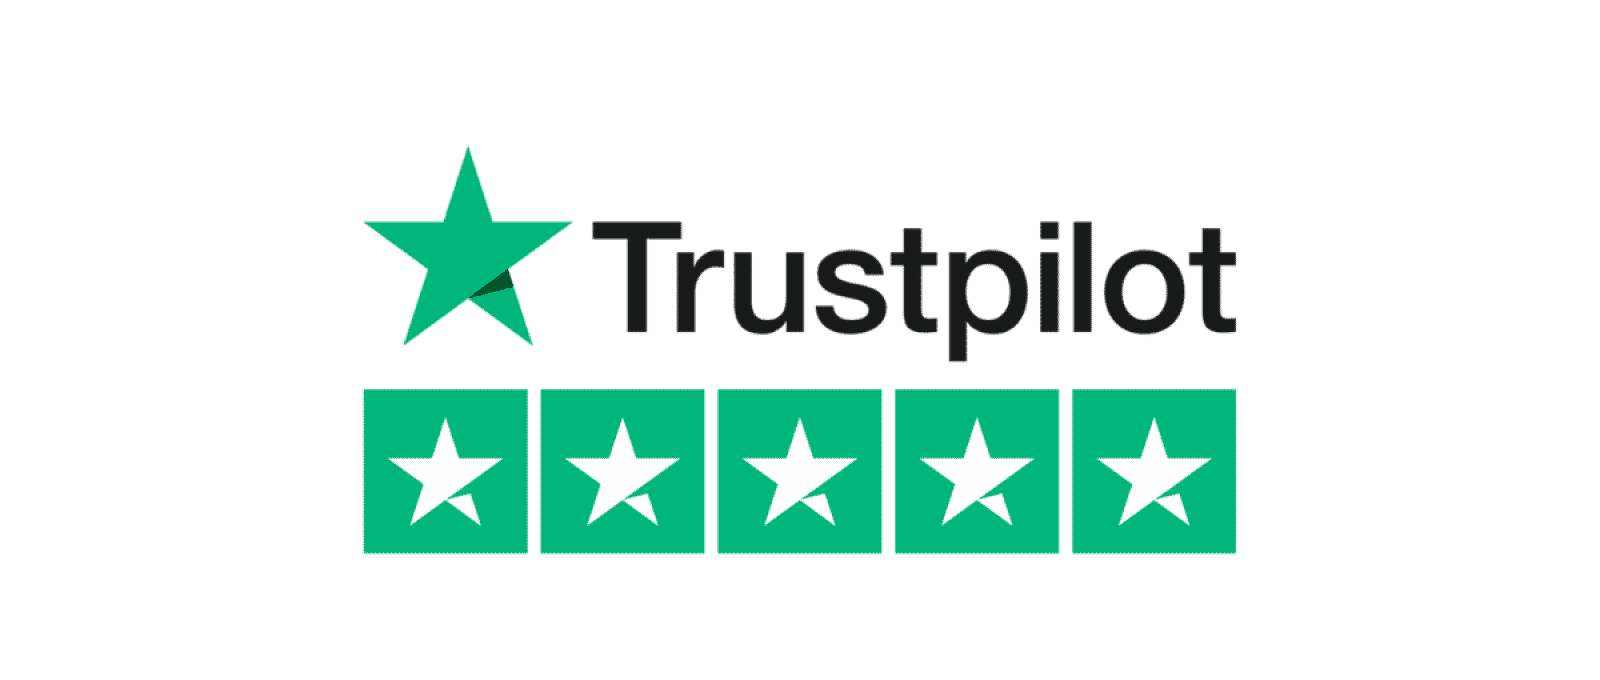 5 star reviews on the international dating site - trust pilot